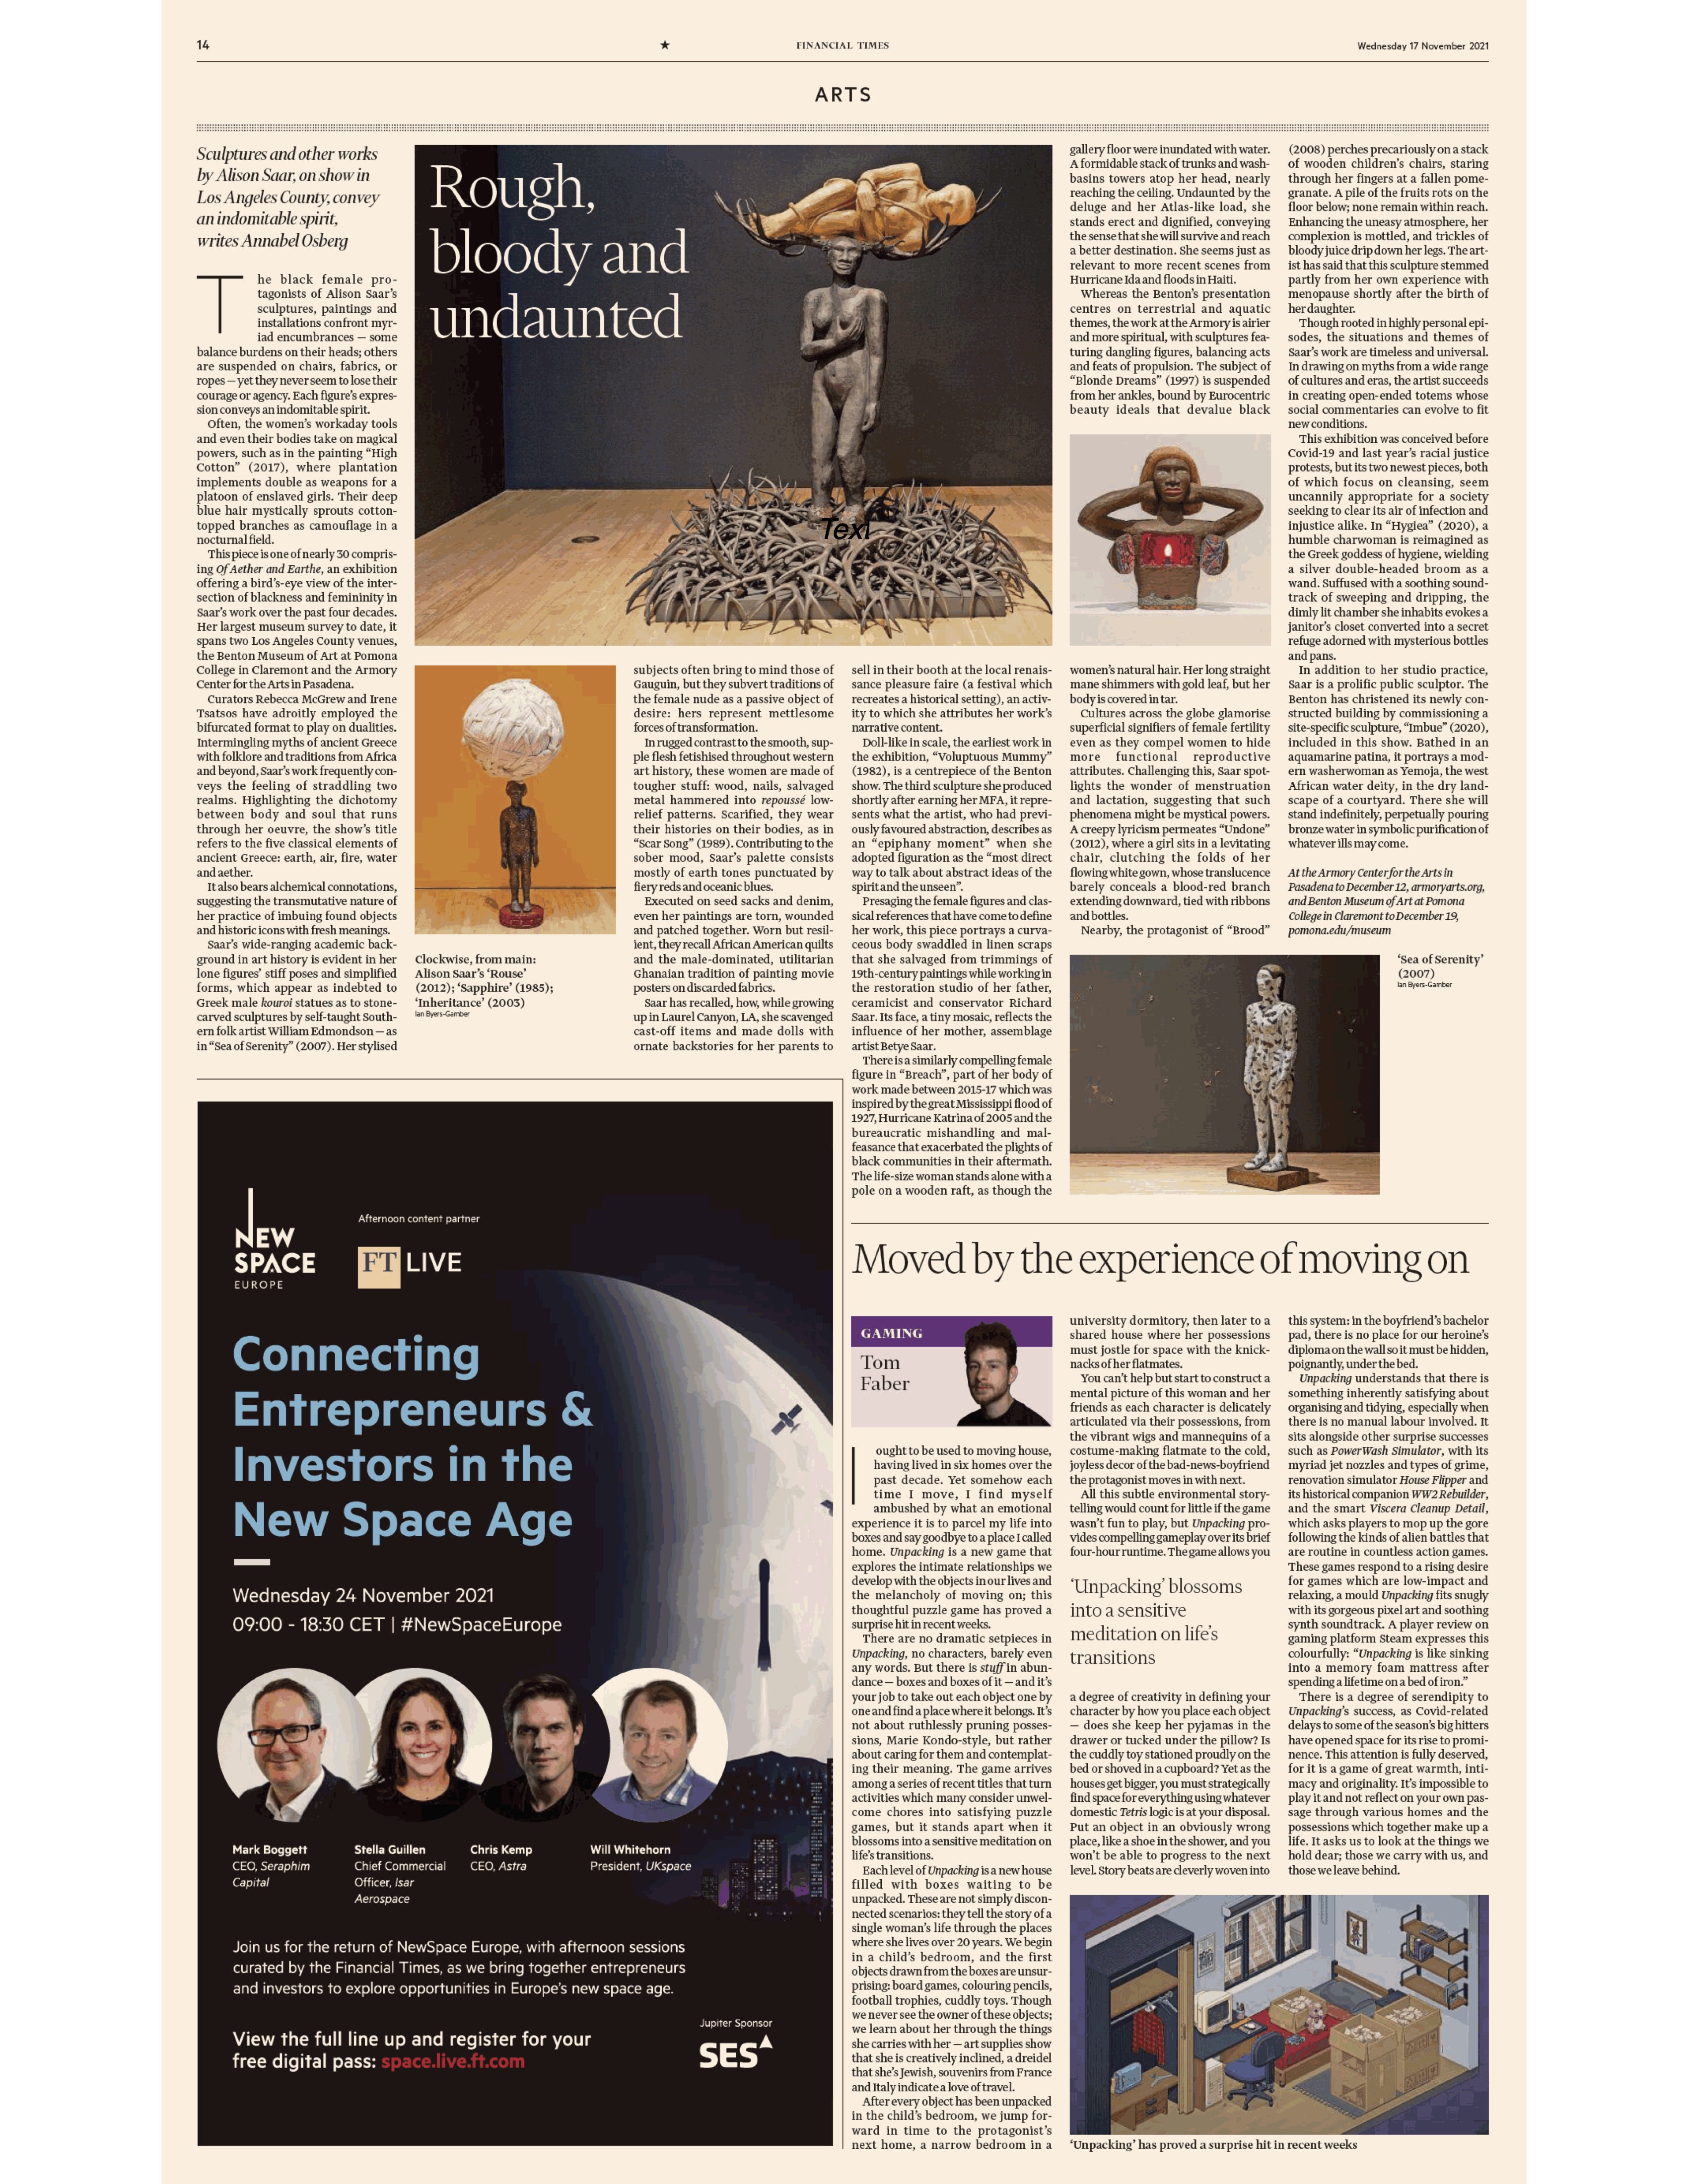 An image of the article about Alison Saar in the Financial times. To read the full article please use the link below.